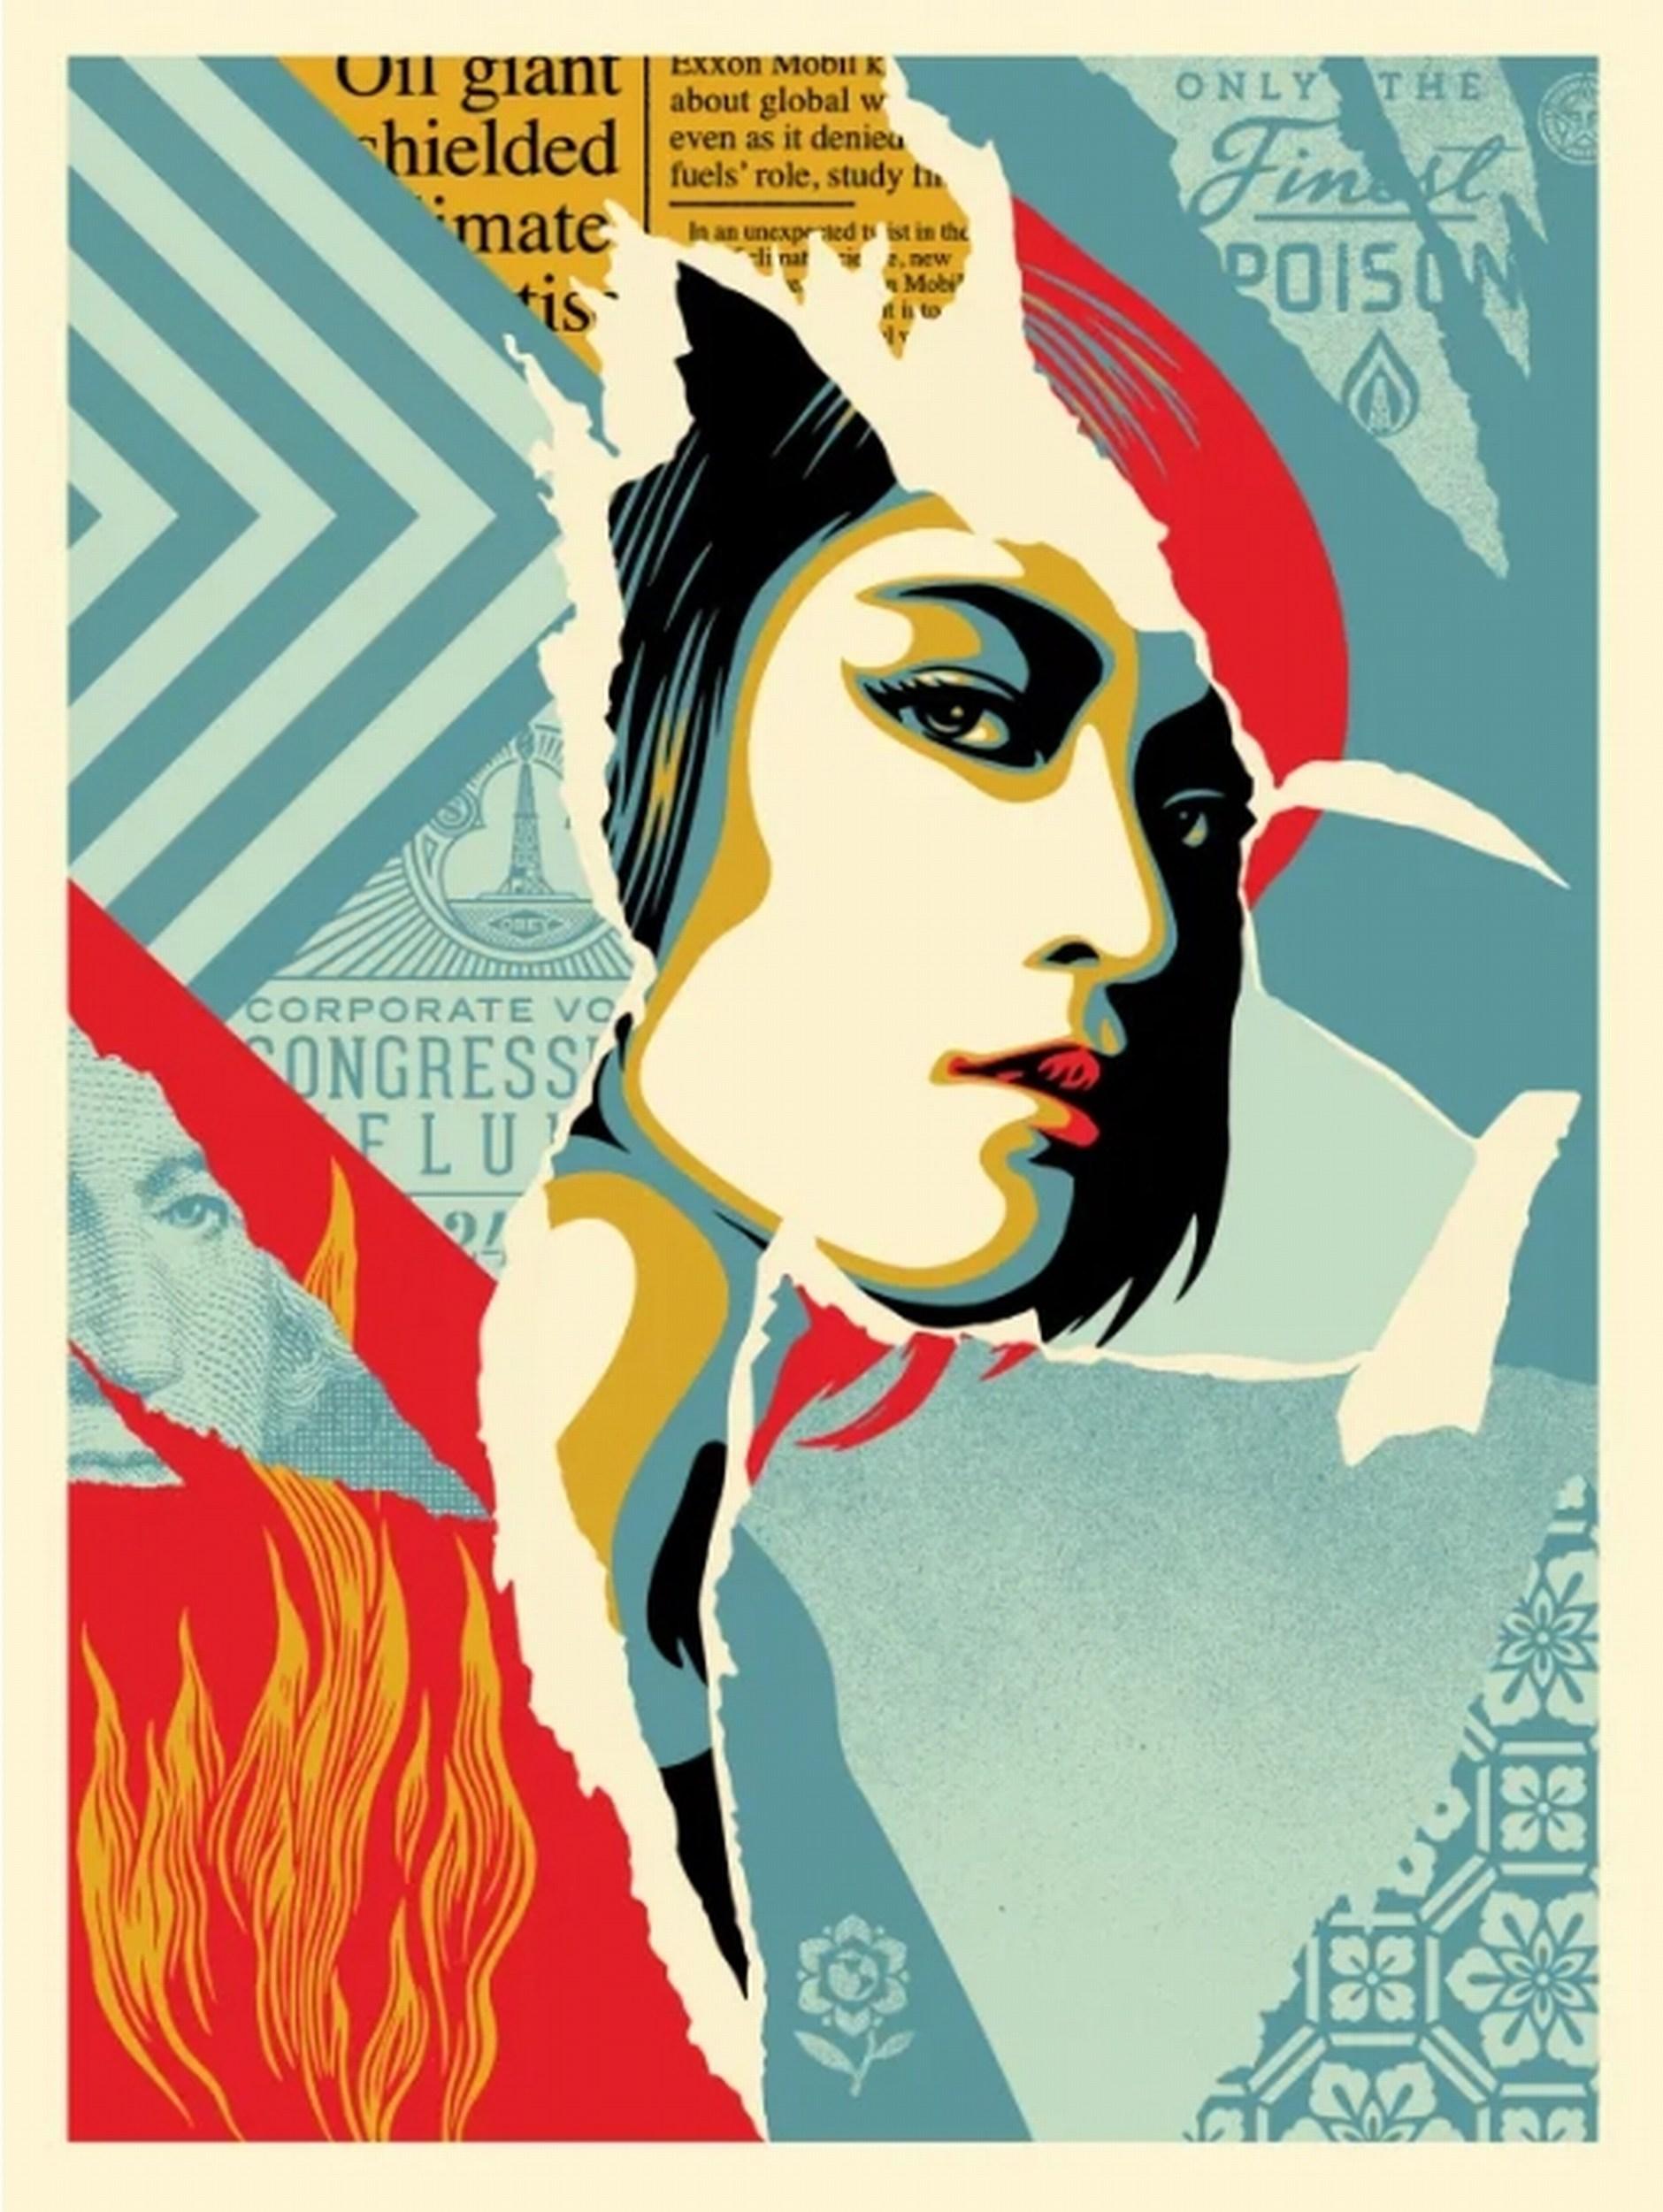 Only The Finest Poison (Iconic, oil industries, deceptive marketing, bribing) - Print by Shepard Fairey